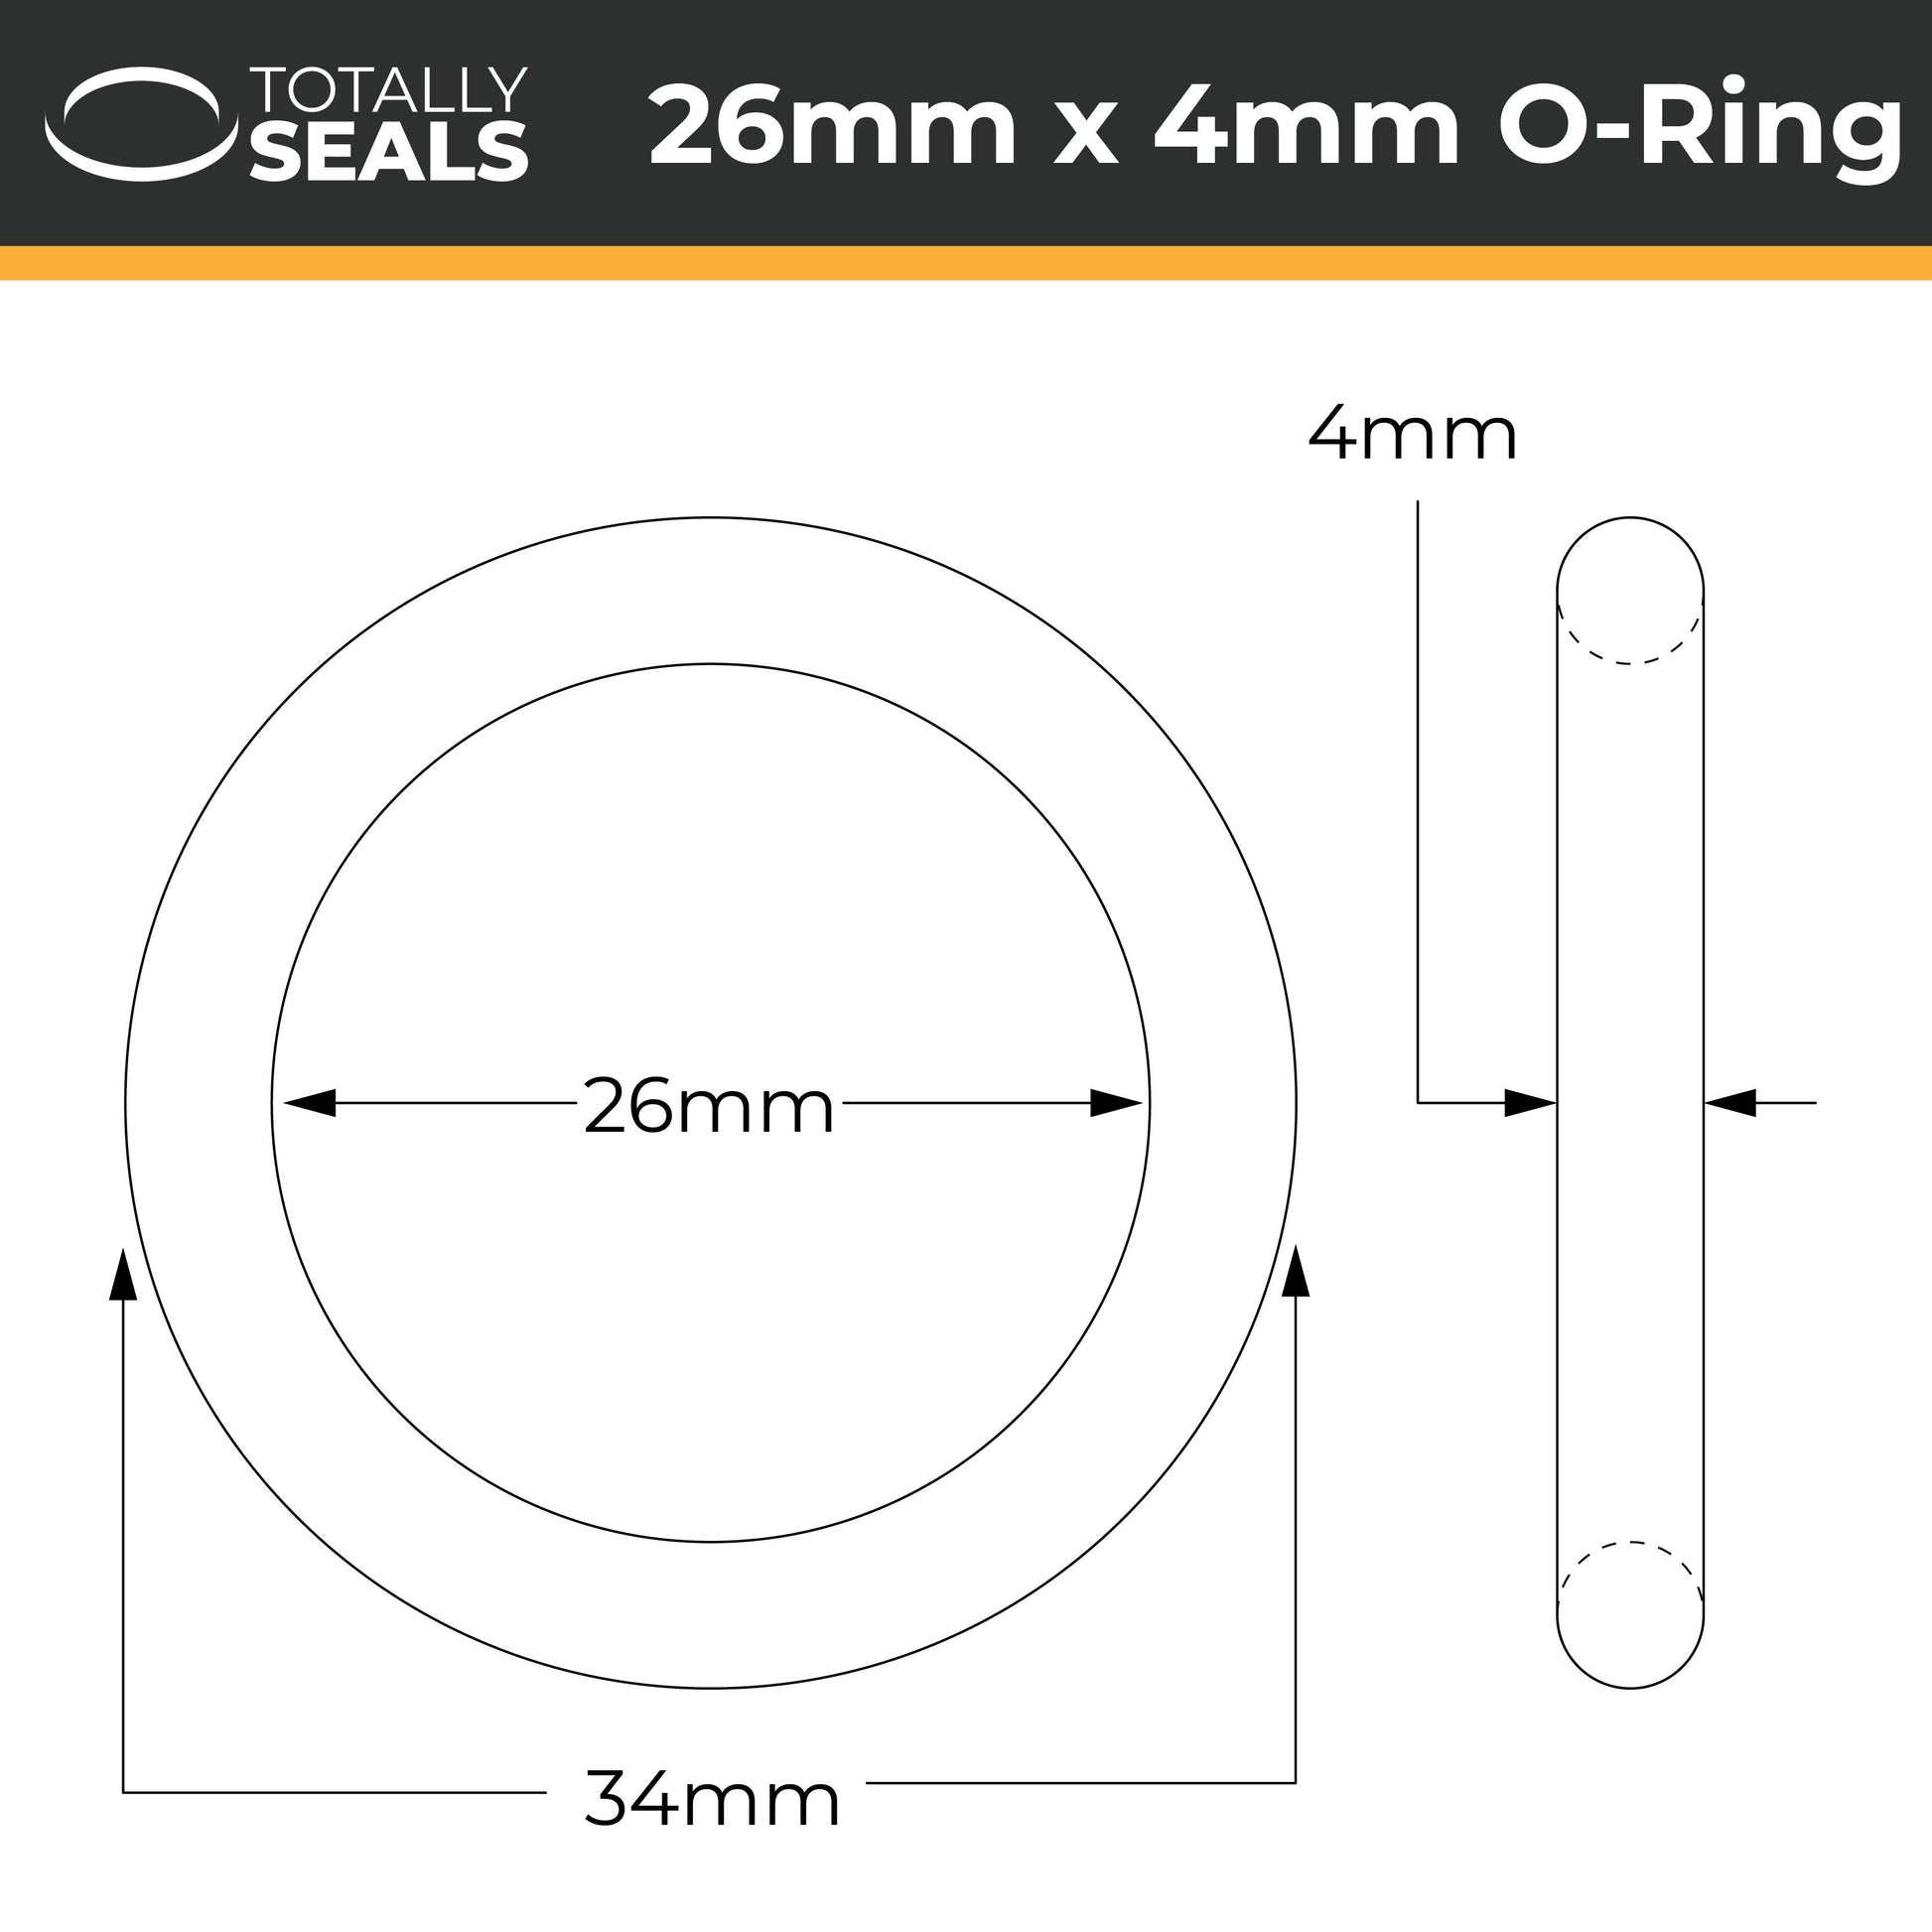 26mm x 4mm (34mm OD) Nitrile O-Rings - Totally Seals®